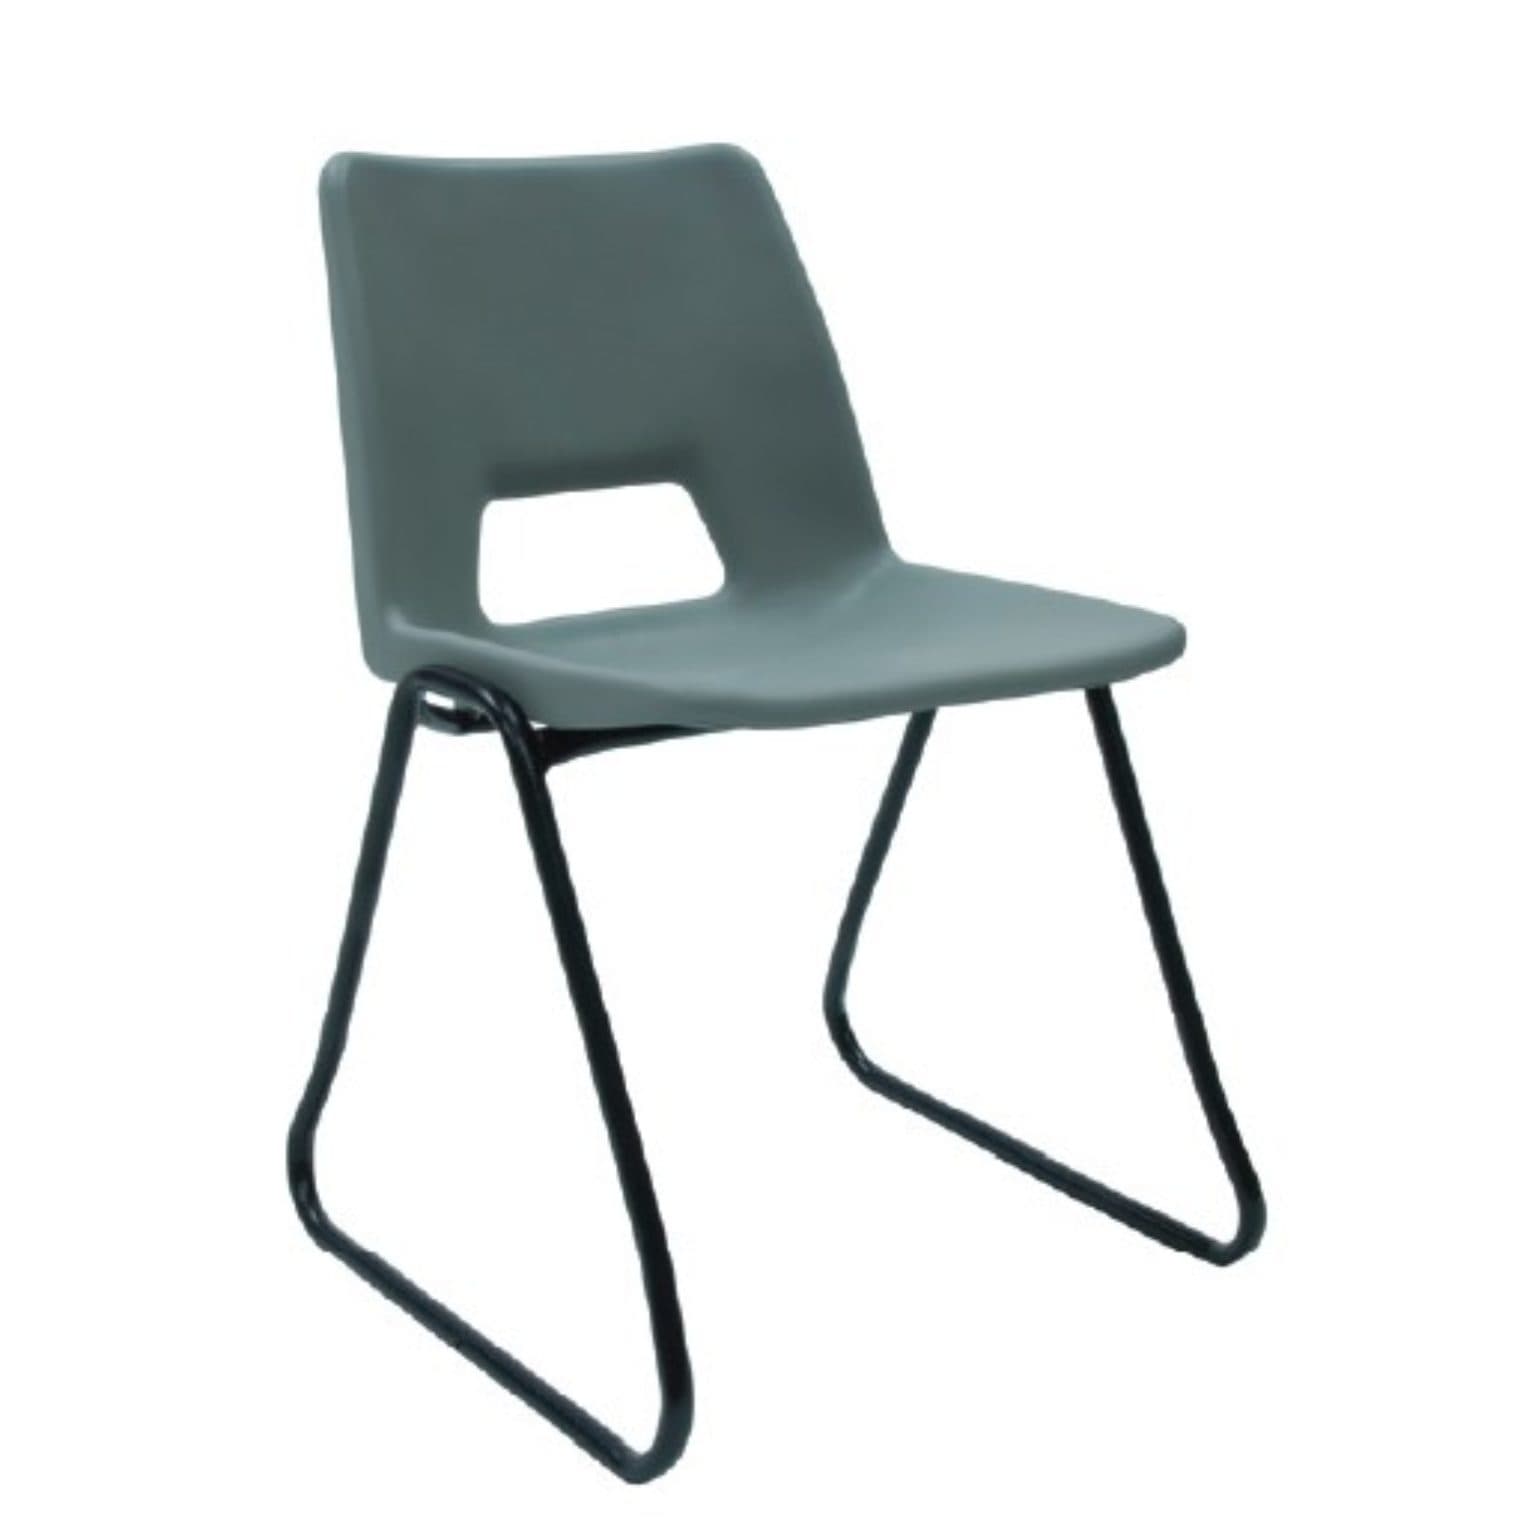 Poly skid base chairs